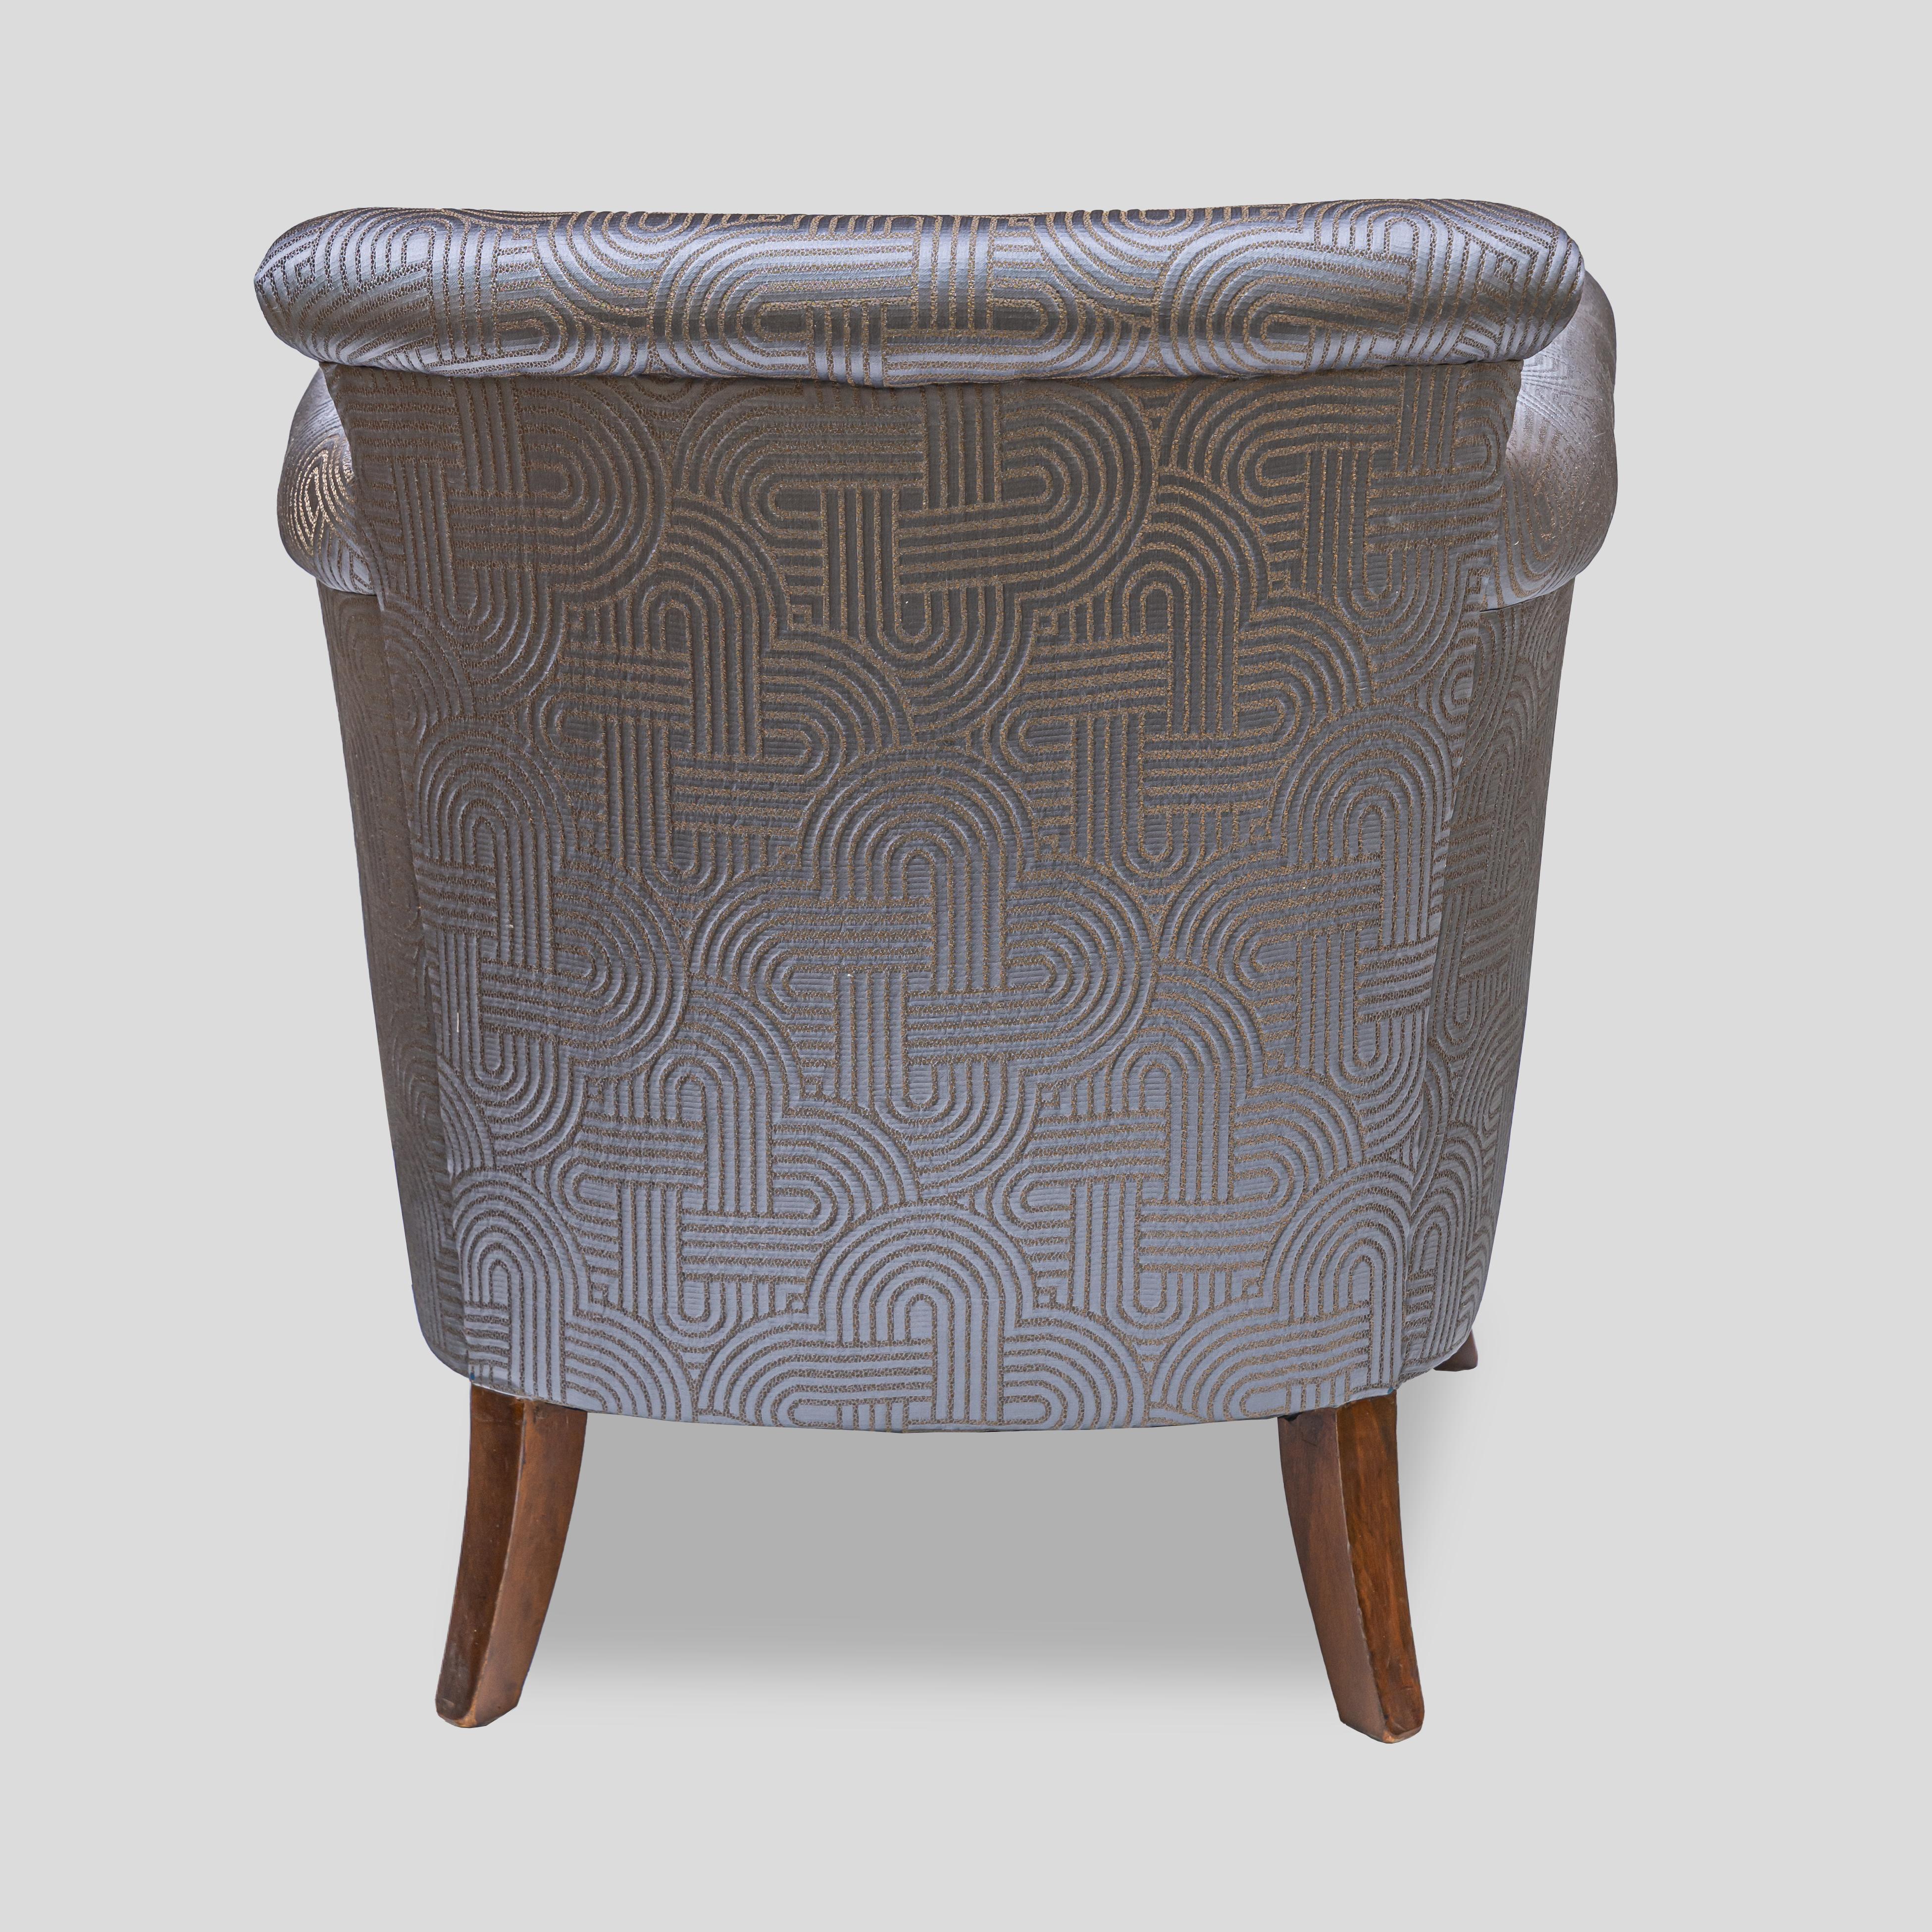 1930s Art Deco French Design Armchair in Satin Grey Upholstery Wall Nut Wood For Sale 1